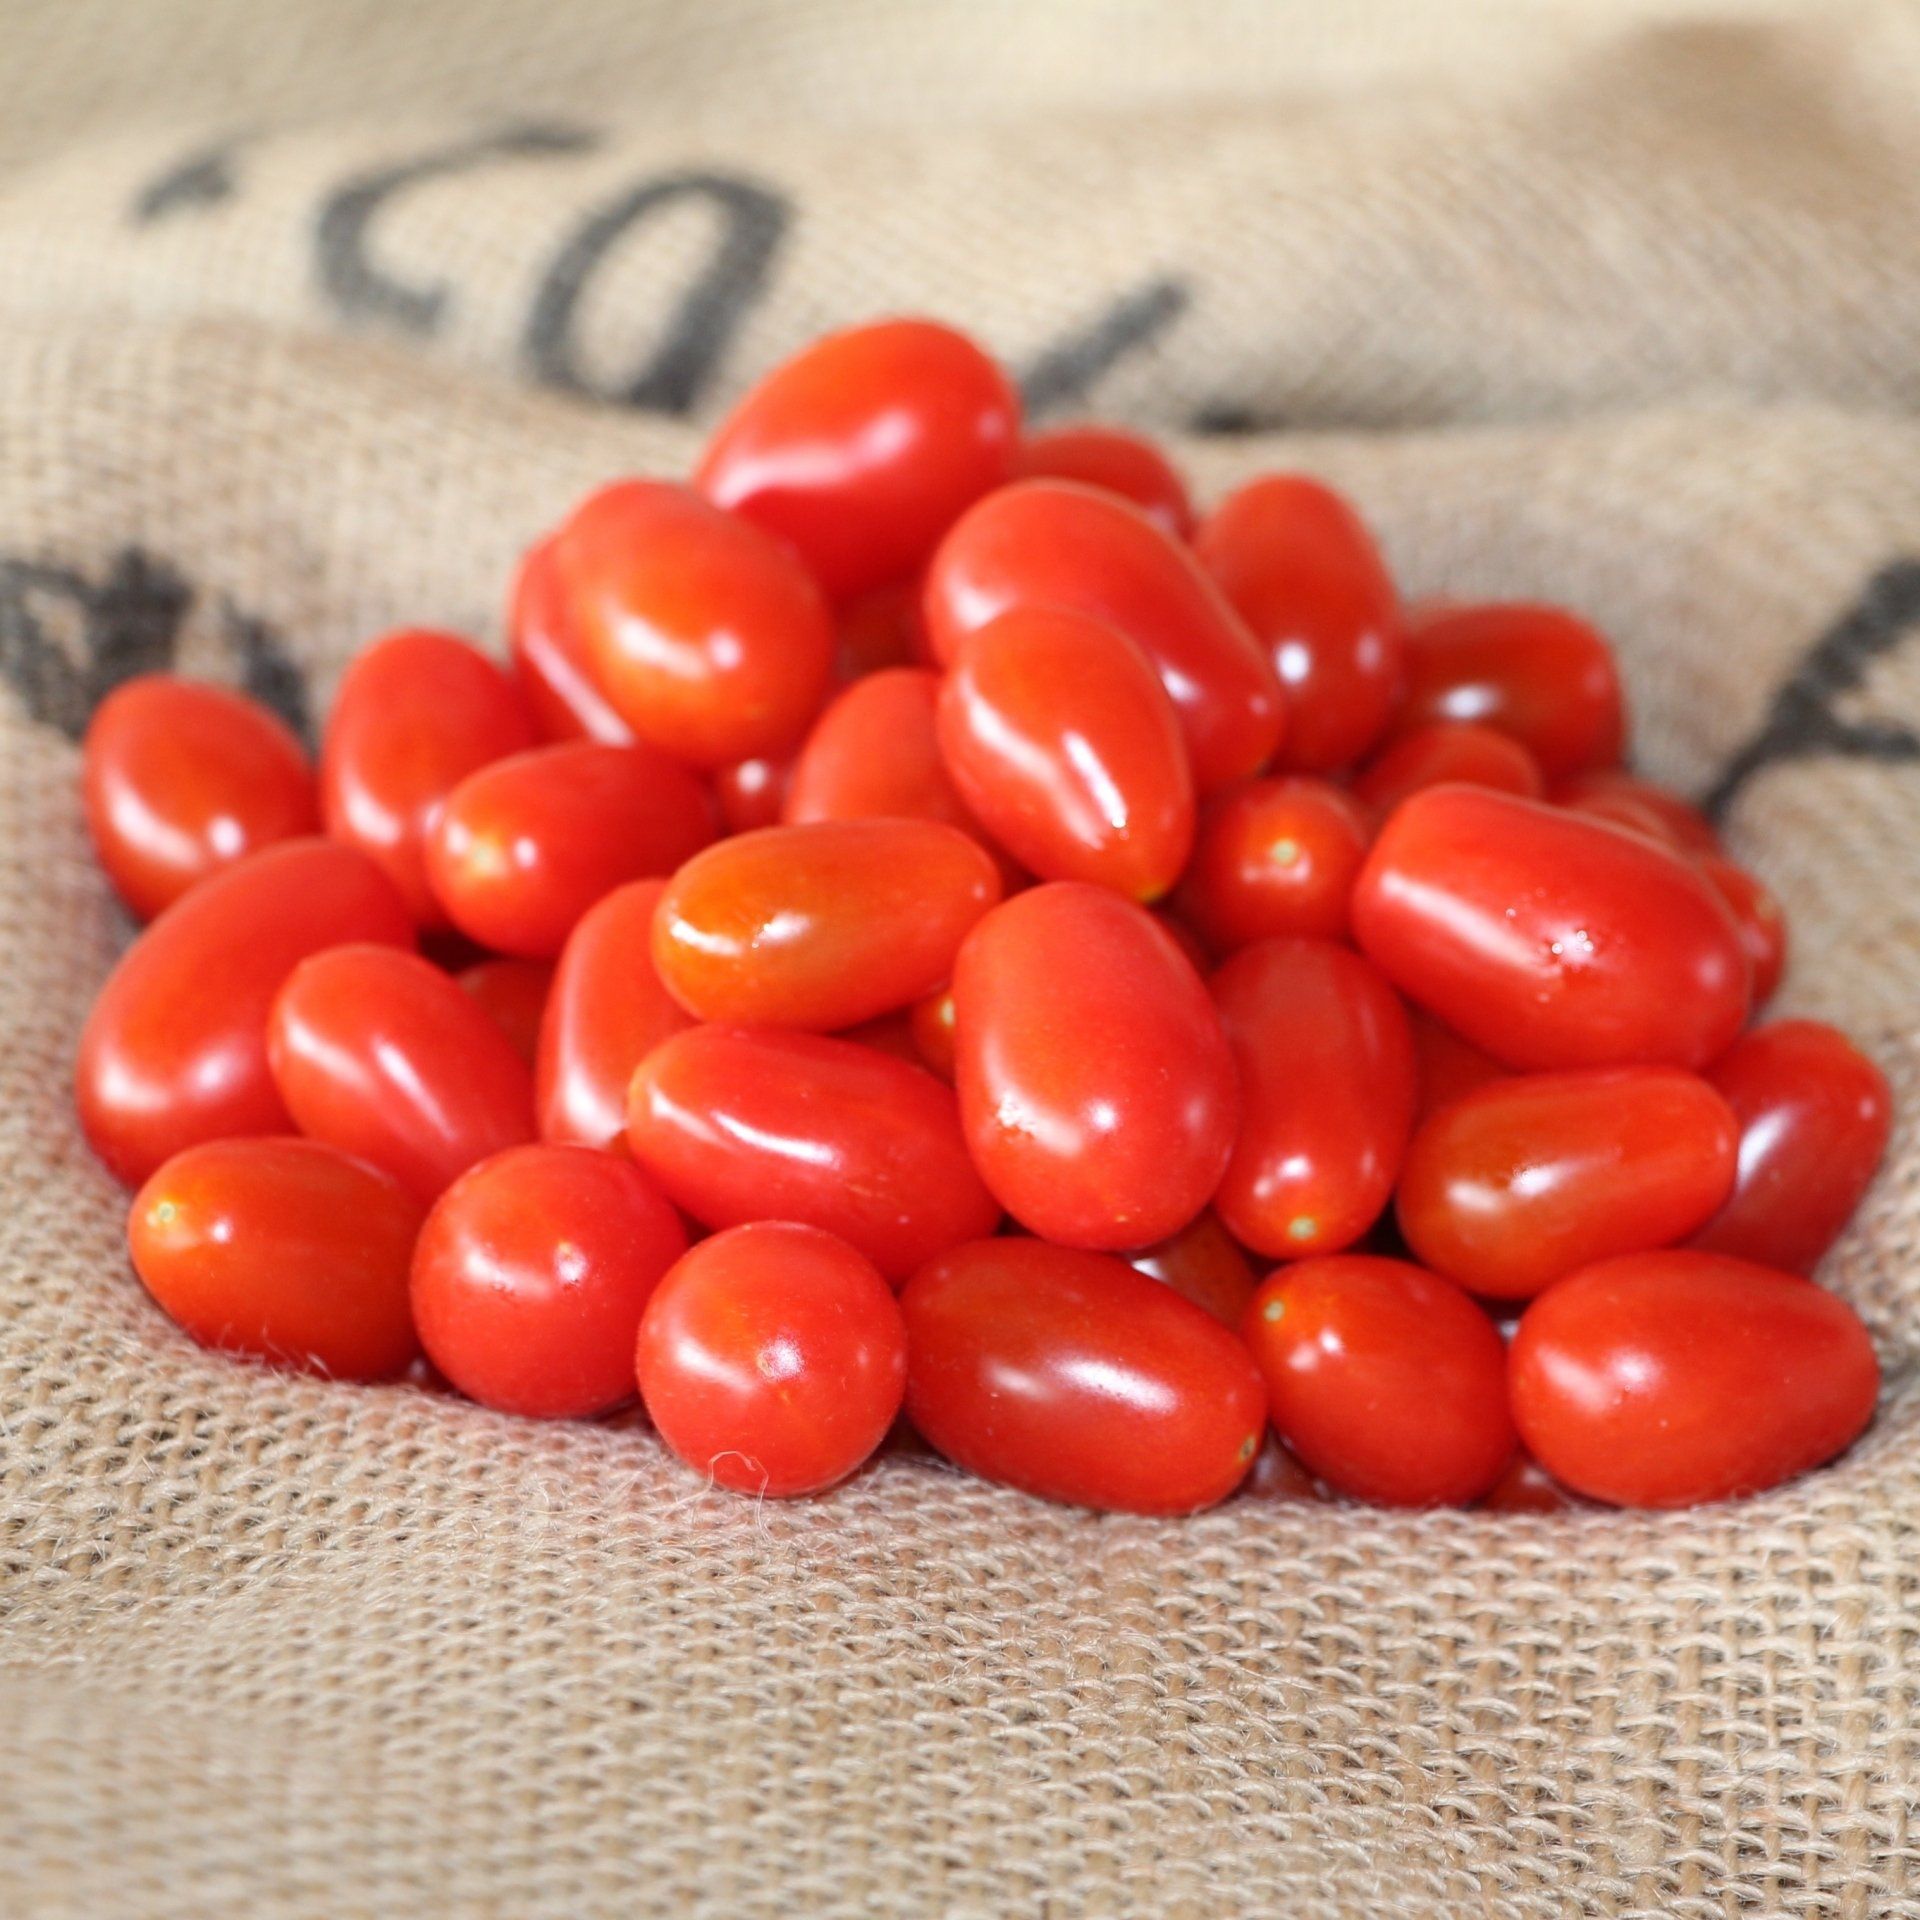 locally grown cherry tomatoes